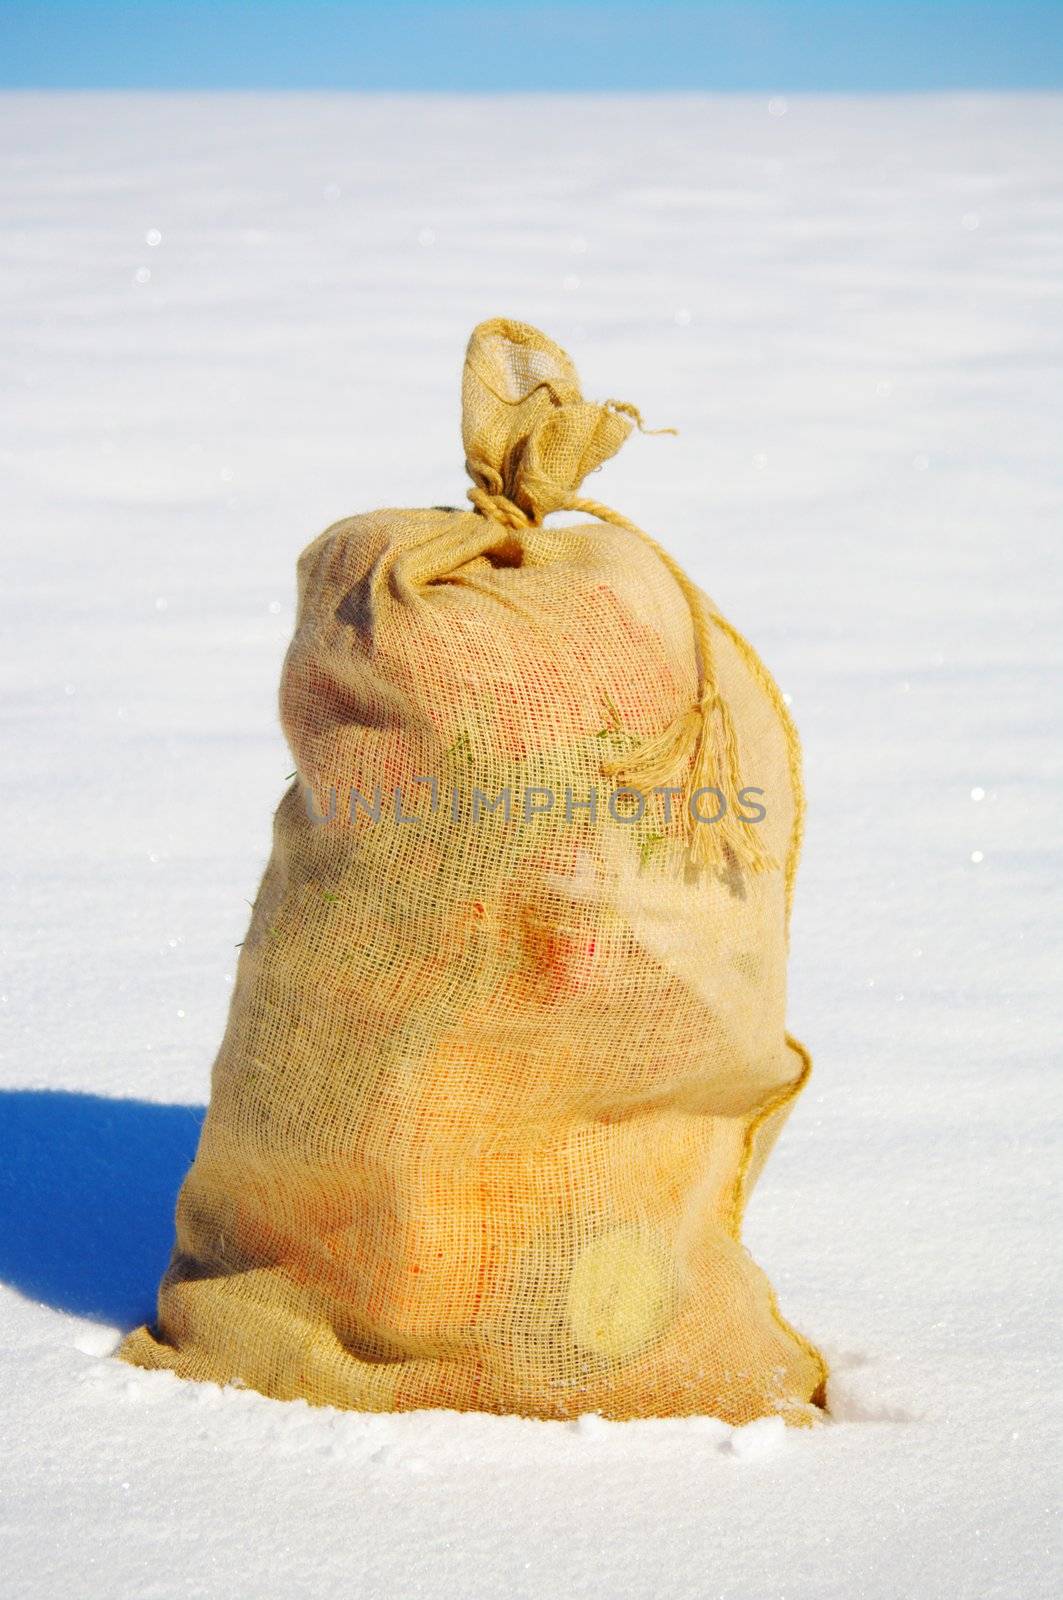 A bag from Santa Claus in a snowy landscape